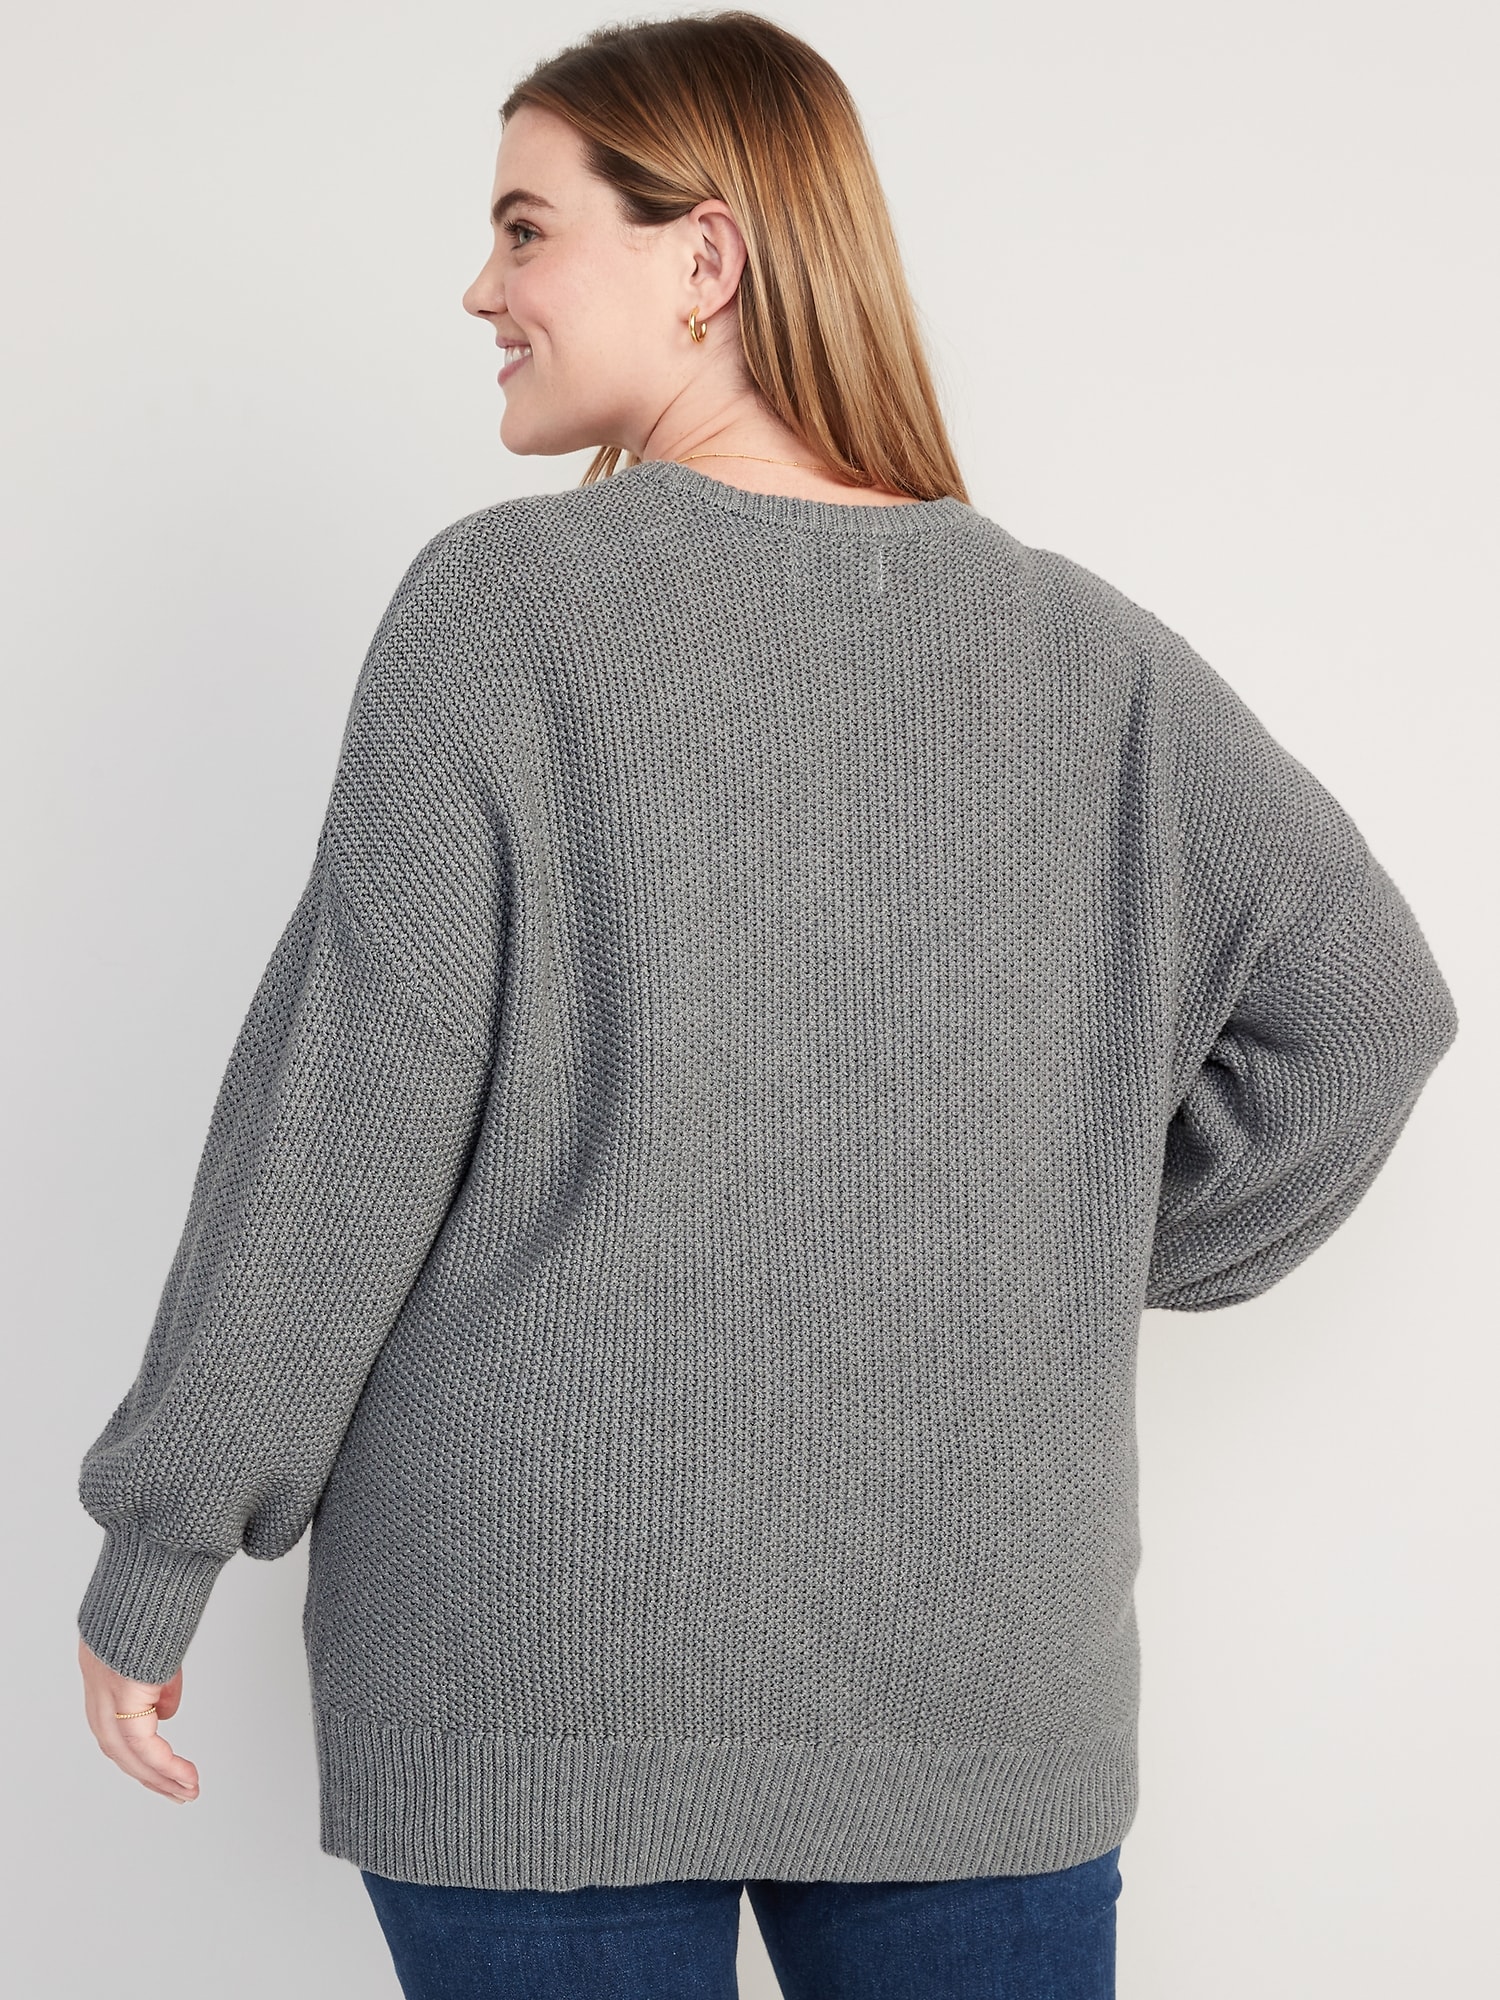 Textured-Knit Tunic Sweater for Women | Old Navy